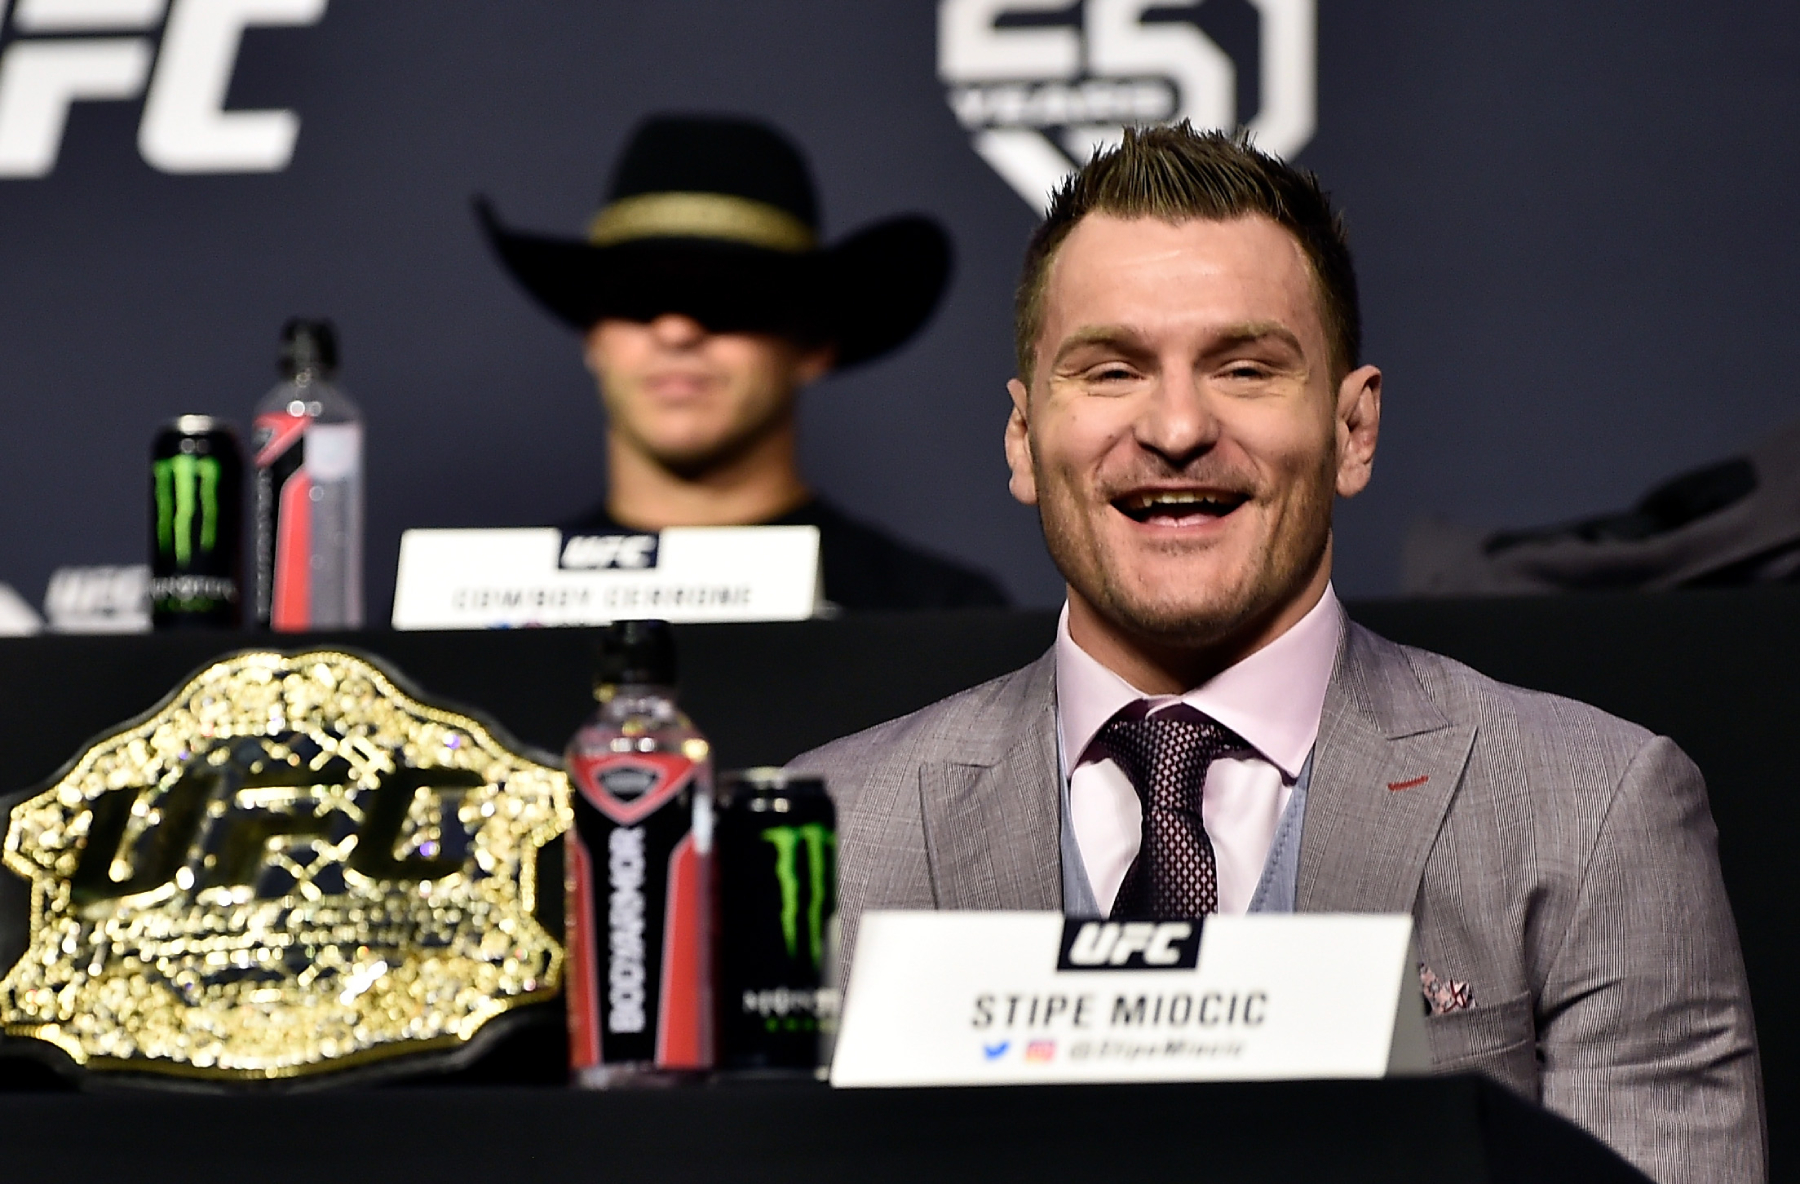 Stipe Miocic is one of the greatest fighters ever. He actually has a cool connection to one of the greatest athletes ever, LeBron James.